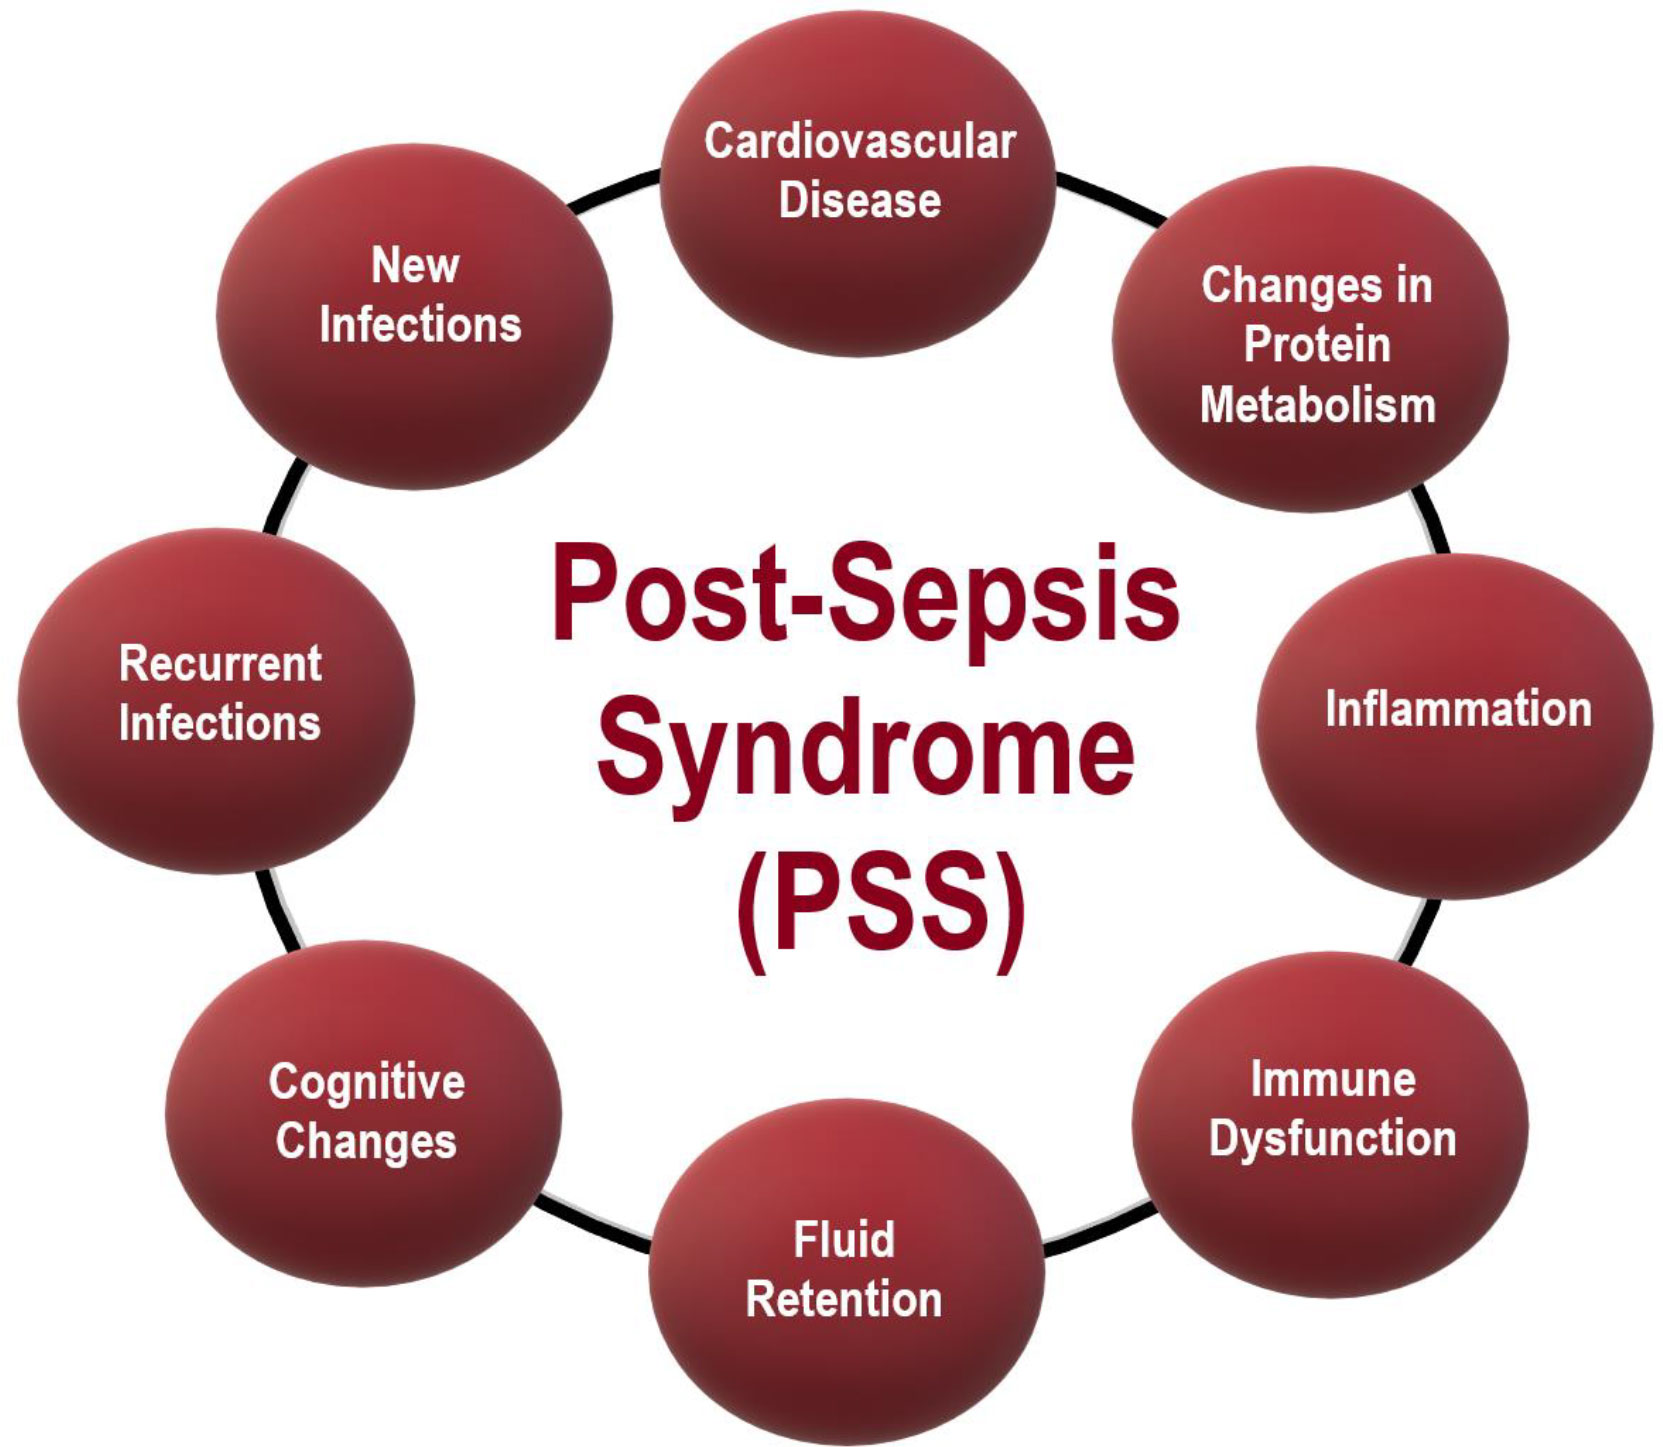 Is Sepsis Painful